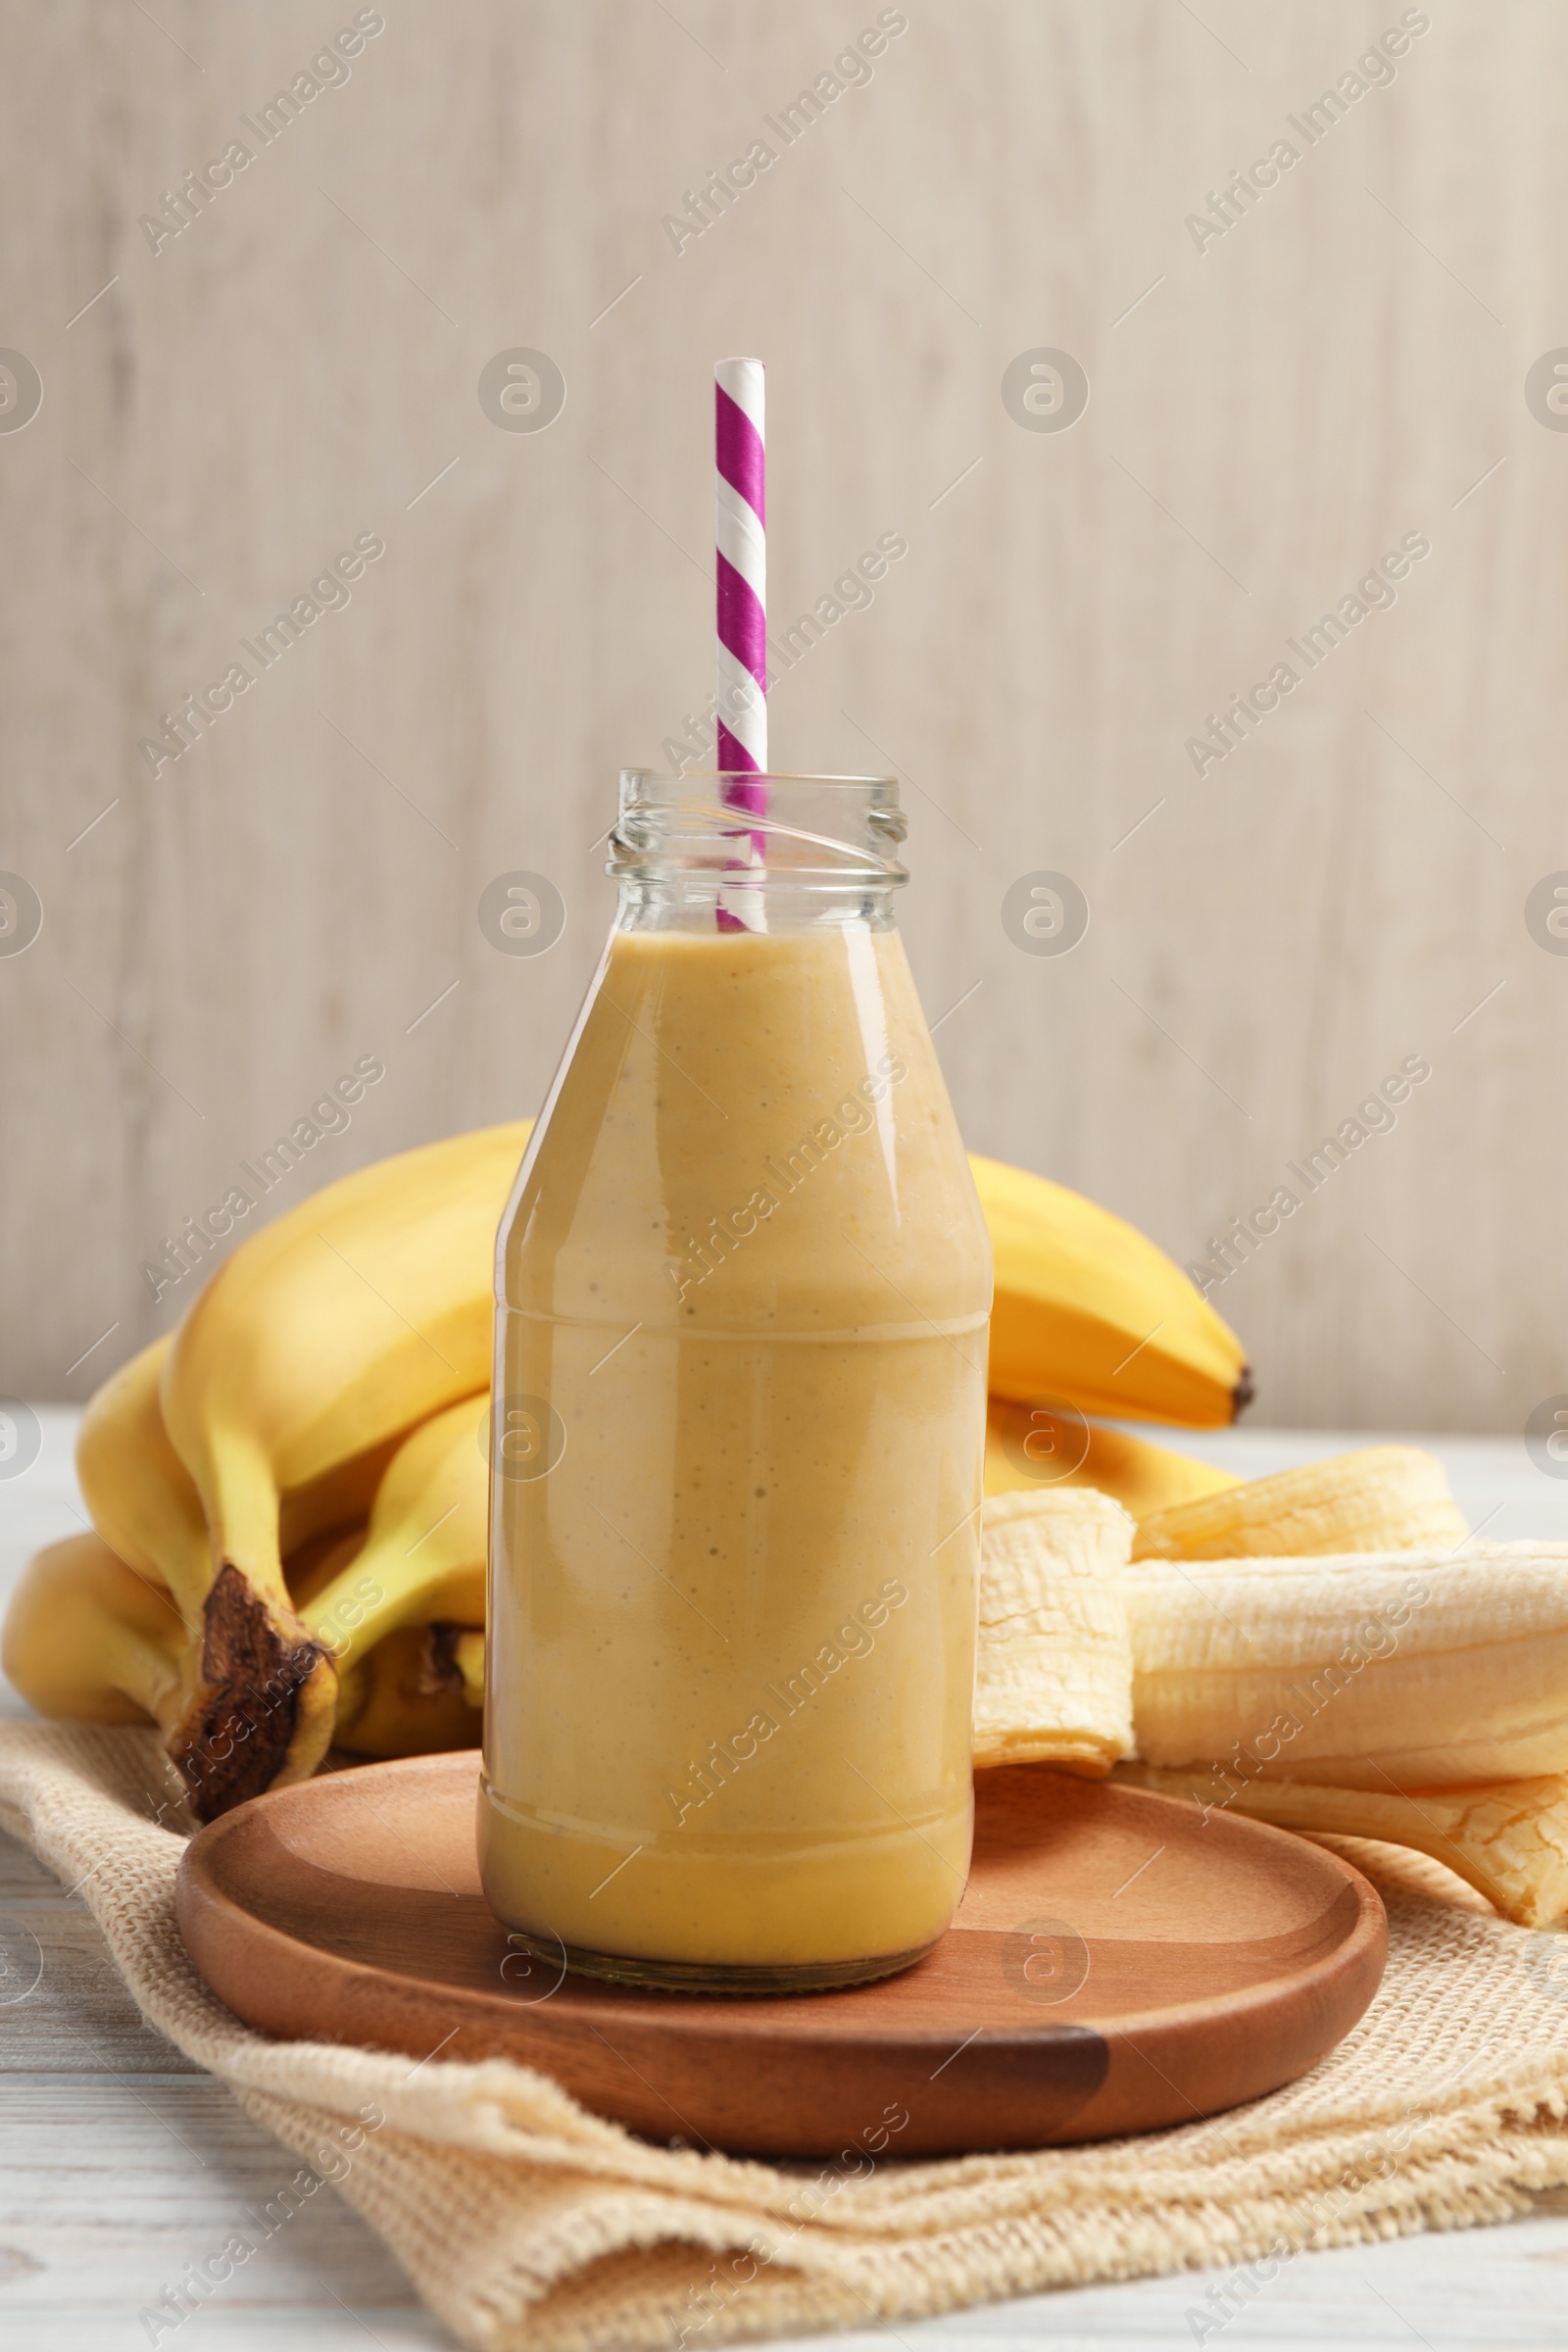 Photo of Bottle of tasty banana smoothie with straw and fresh fruits on white wooden table